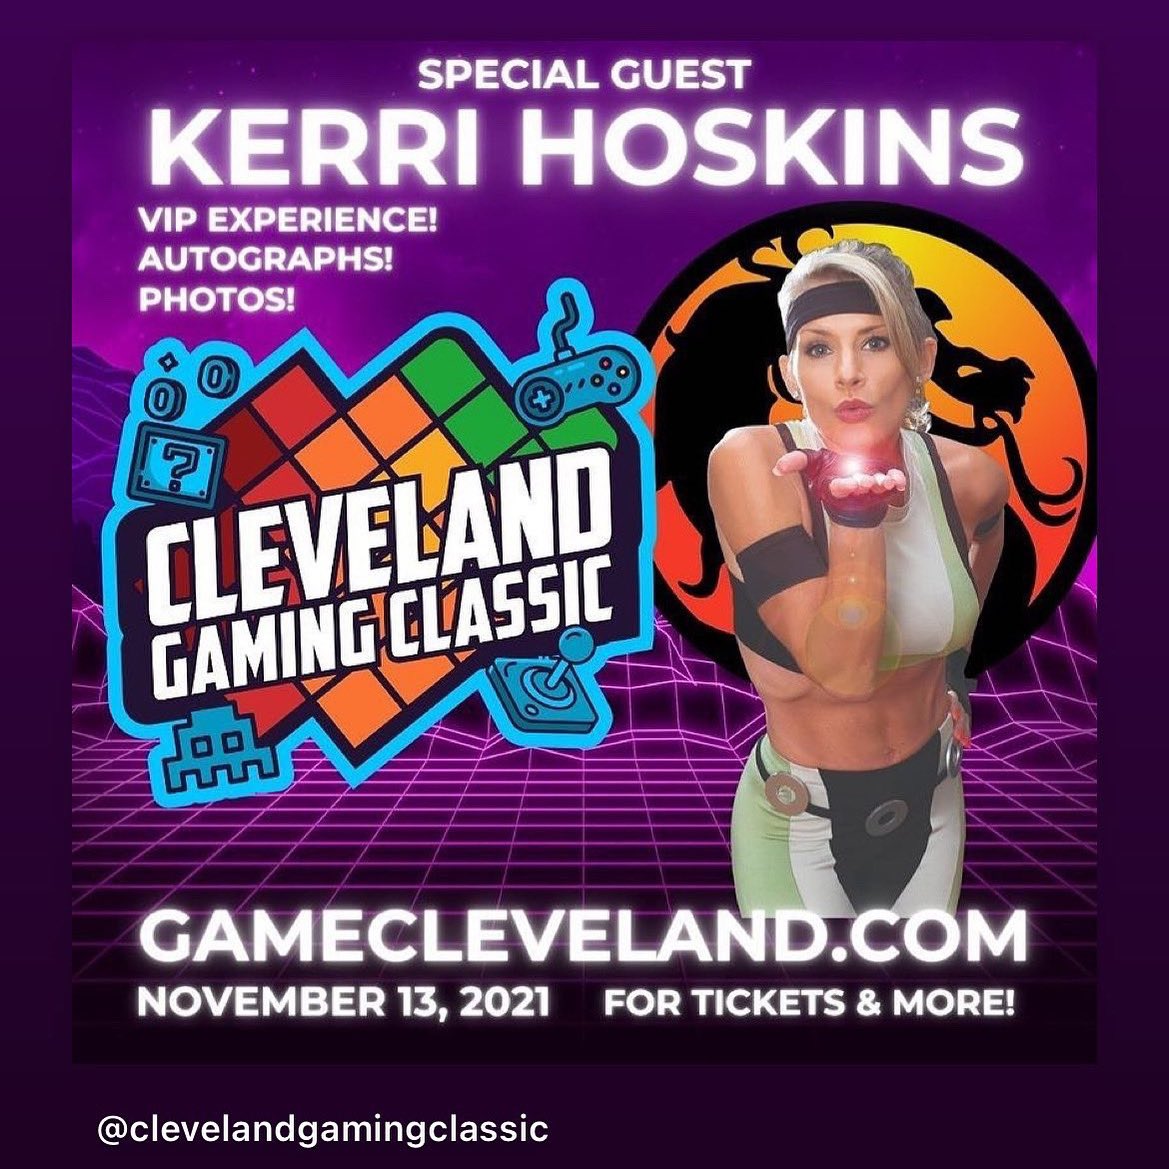 Proud to be part of Cleveland Gaming Classic on November 13, benefitting @UCPcleveland ! @UCPnational is close to my heart w/my twins having #cerebralpalsy

#kerrihoskins #kerrianngallery #cleveland #clevelandgamers #clevelandgamingclassic #mk #mortalkombat #sonyablade #ComicCon